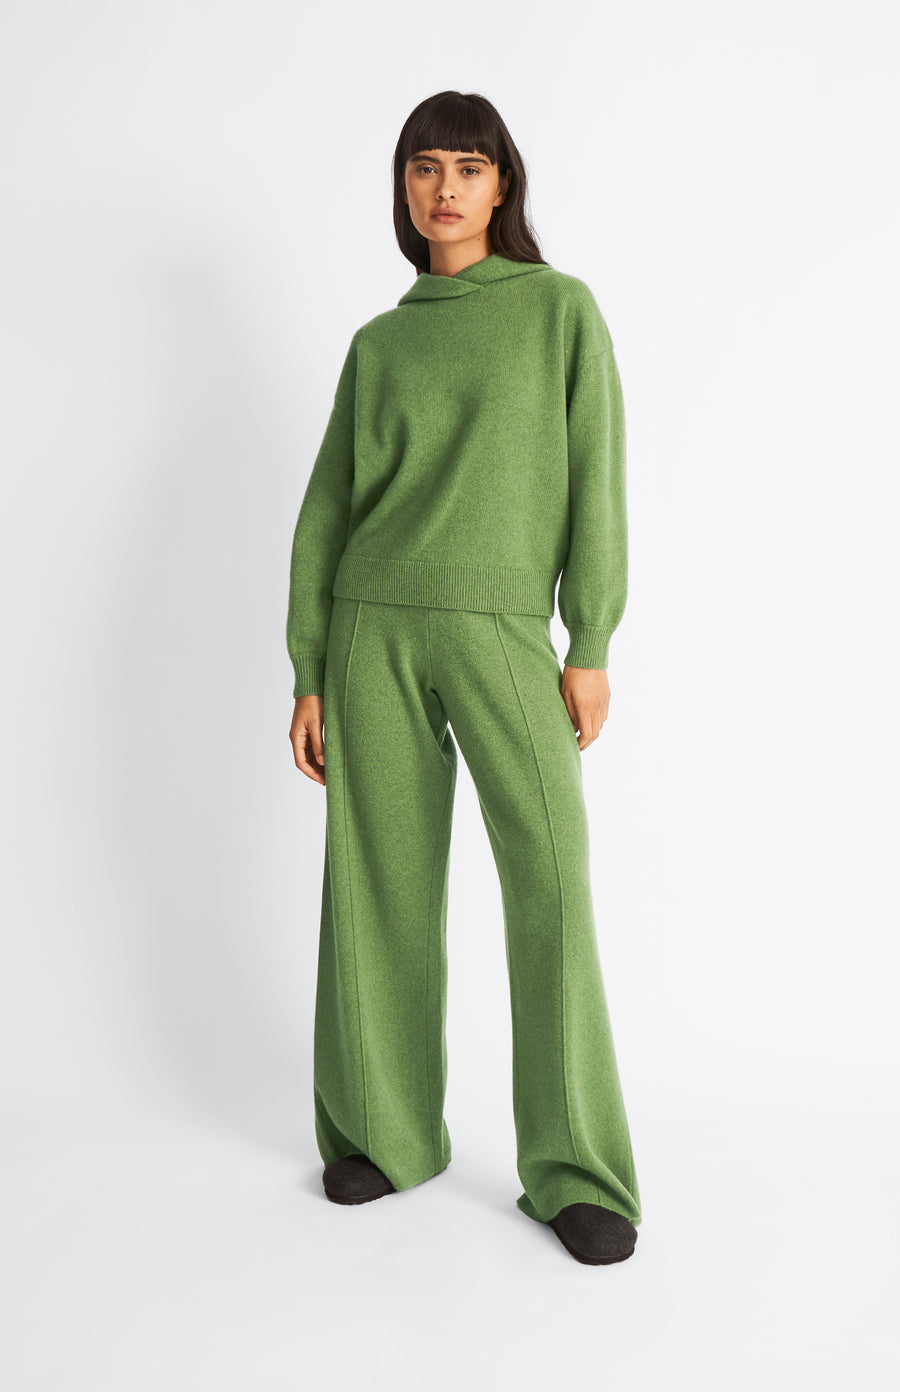 Pringle of Scotland Women's Cashmere Blend Hoodie In Wood Sage on model with matching trousers